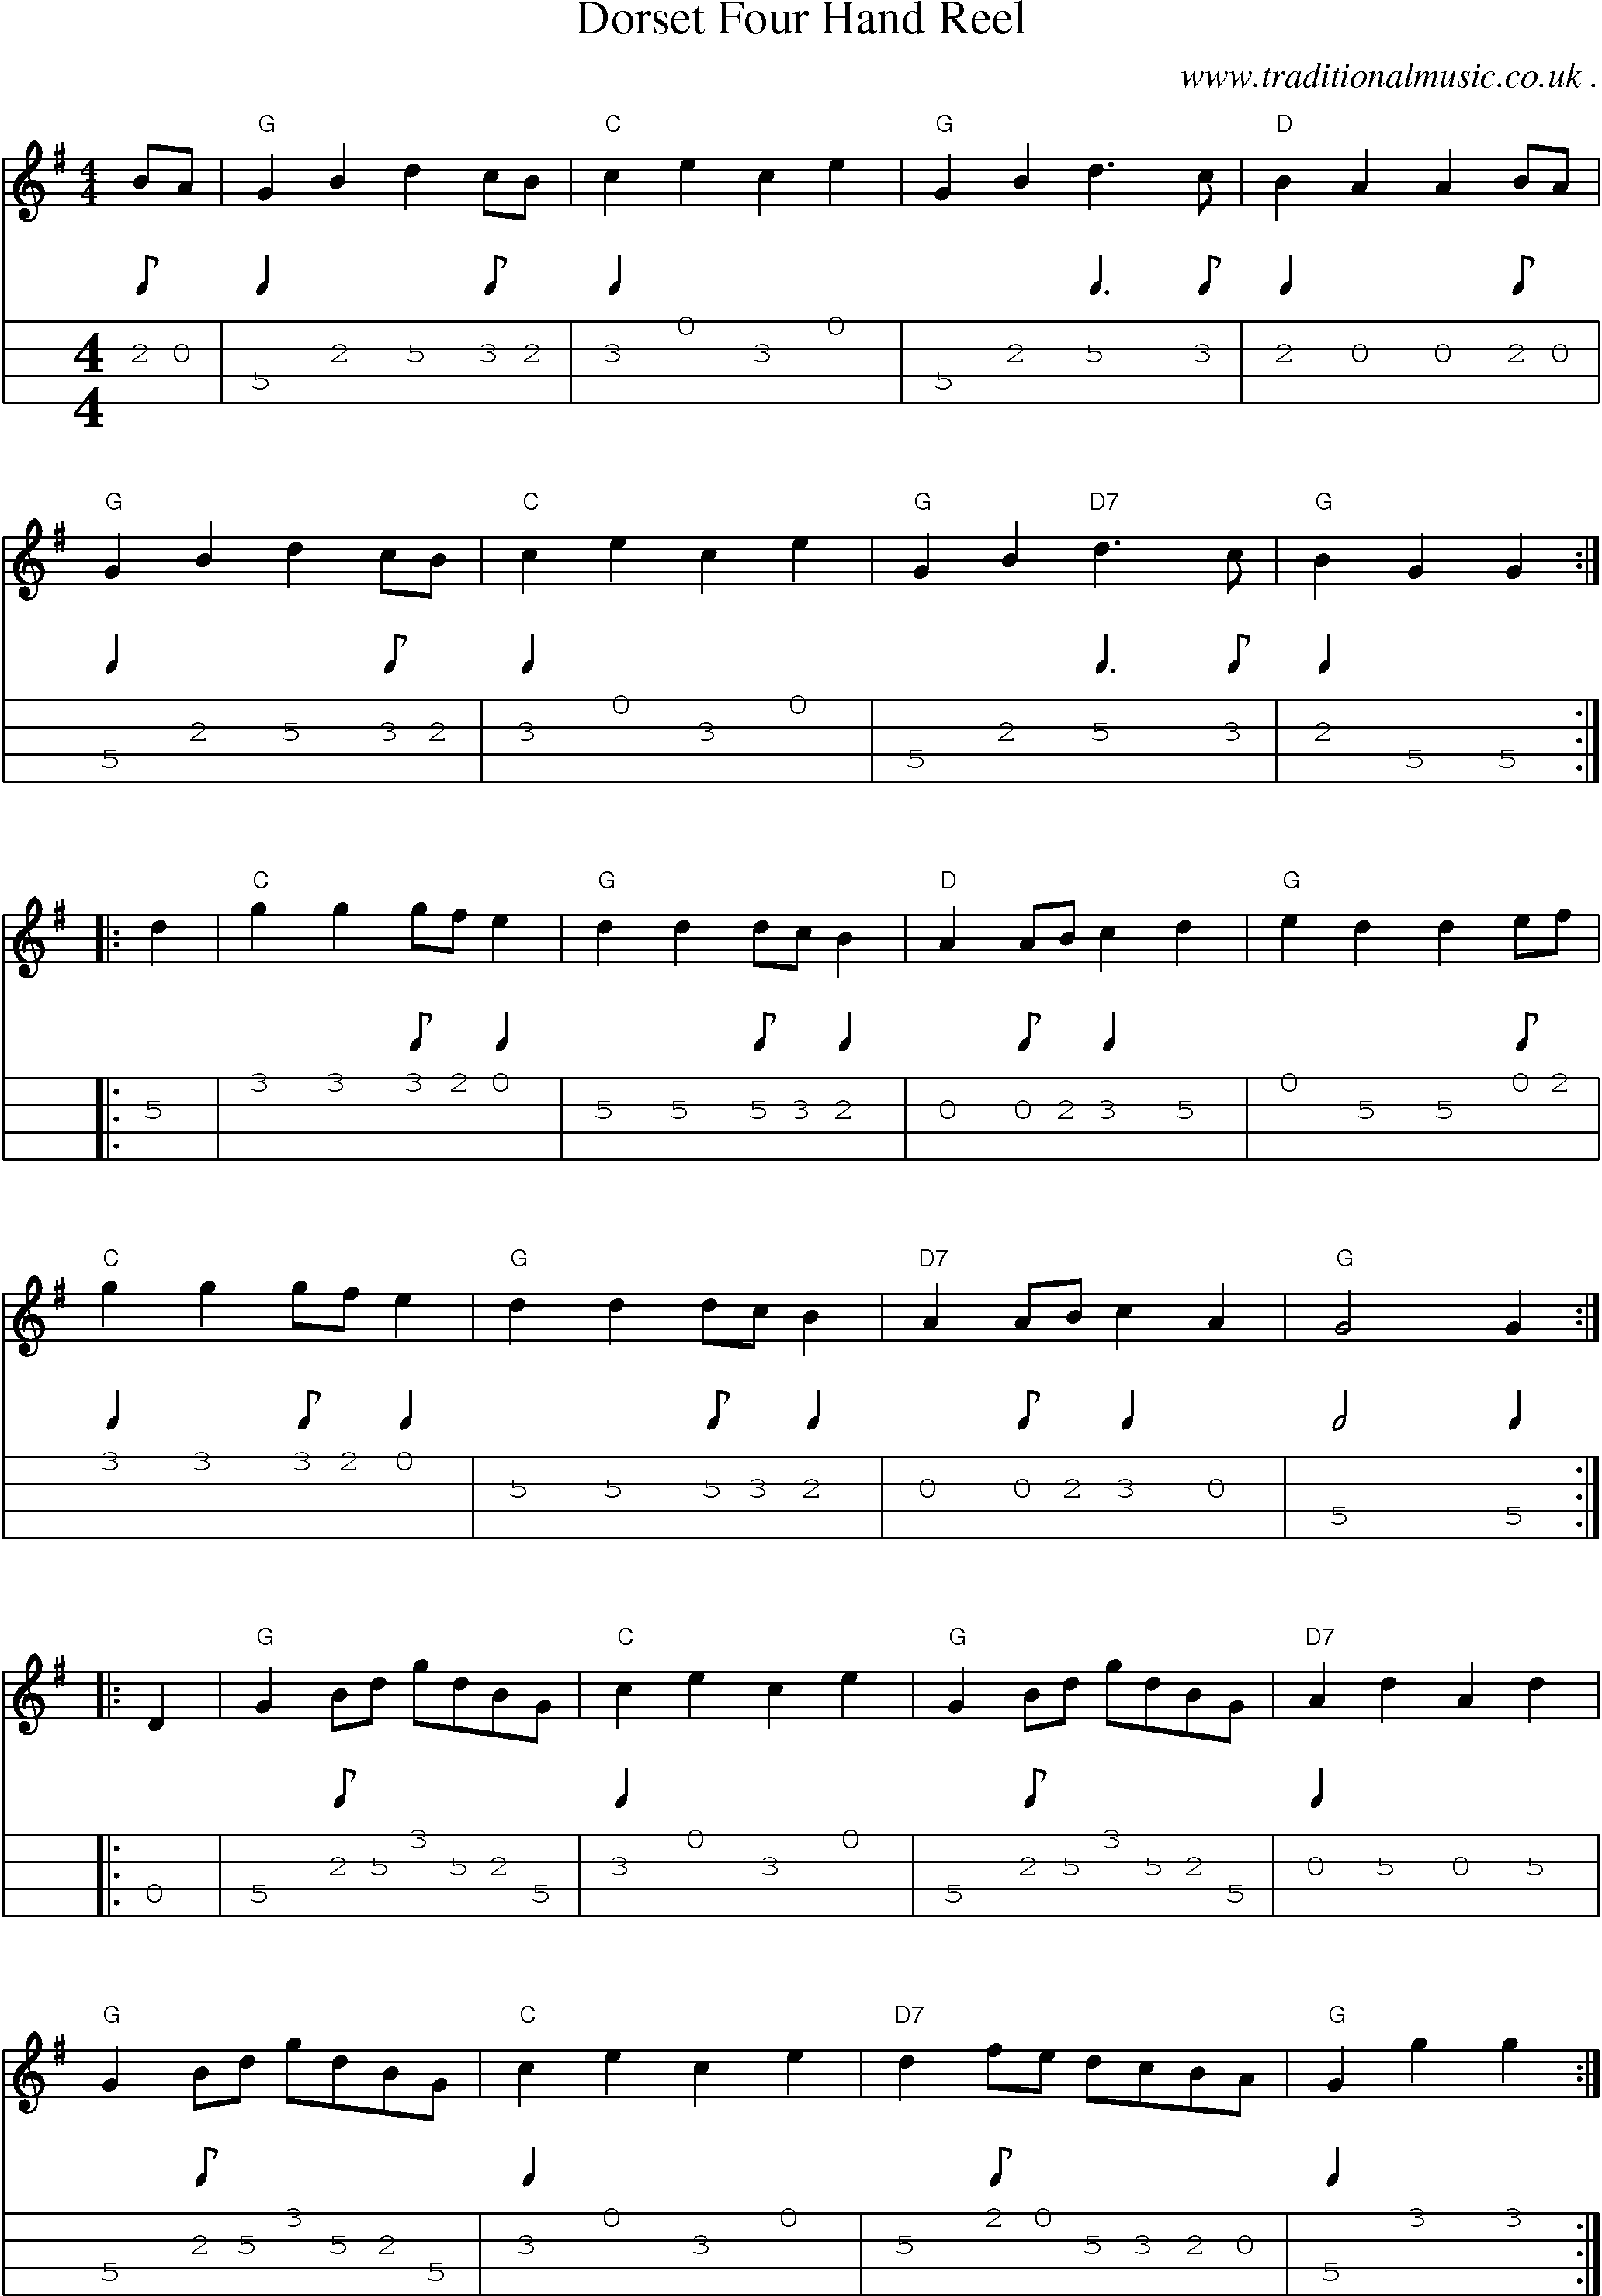 Music Score and Guitar Tabs for Dorset Four Hand Reel